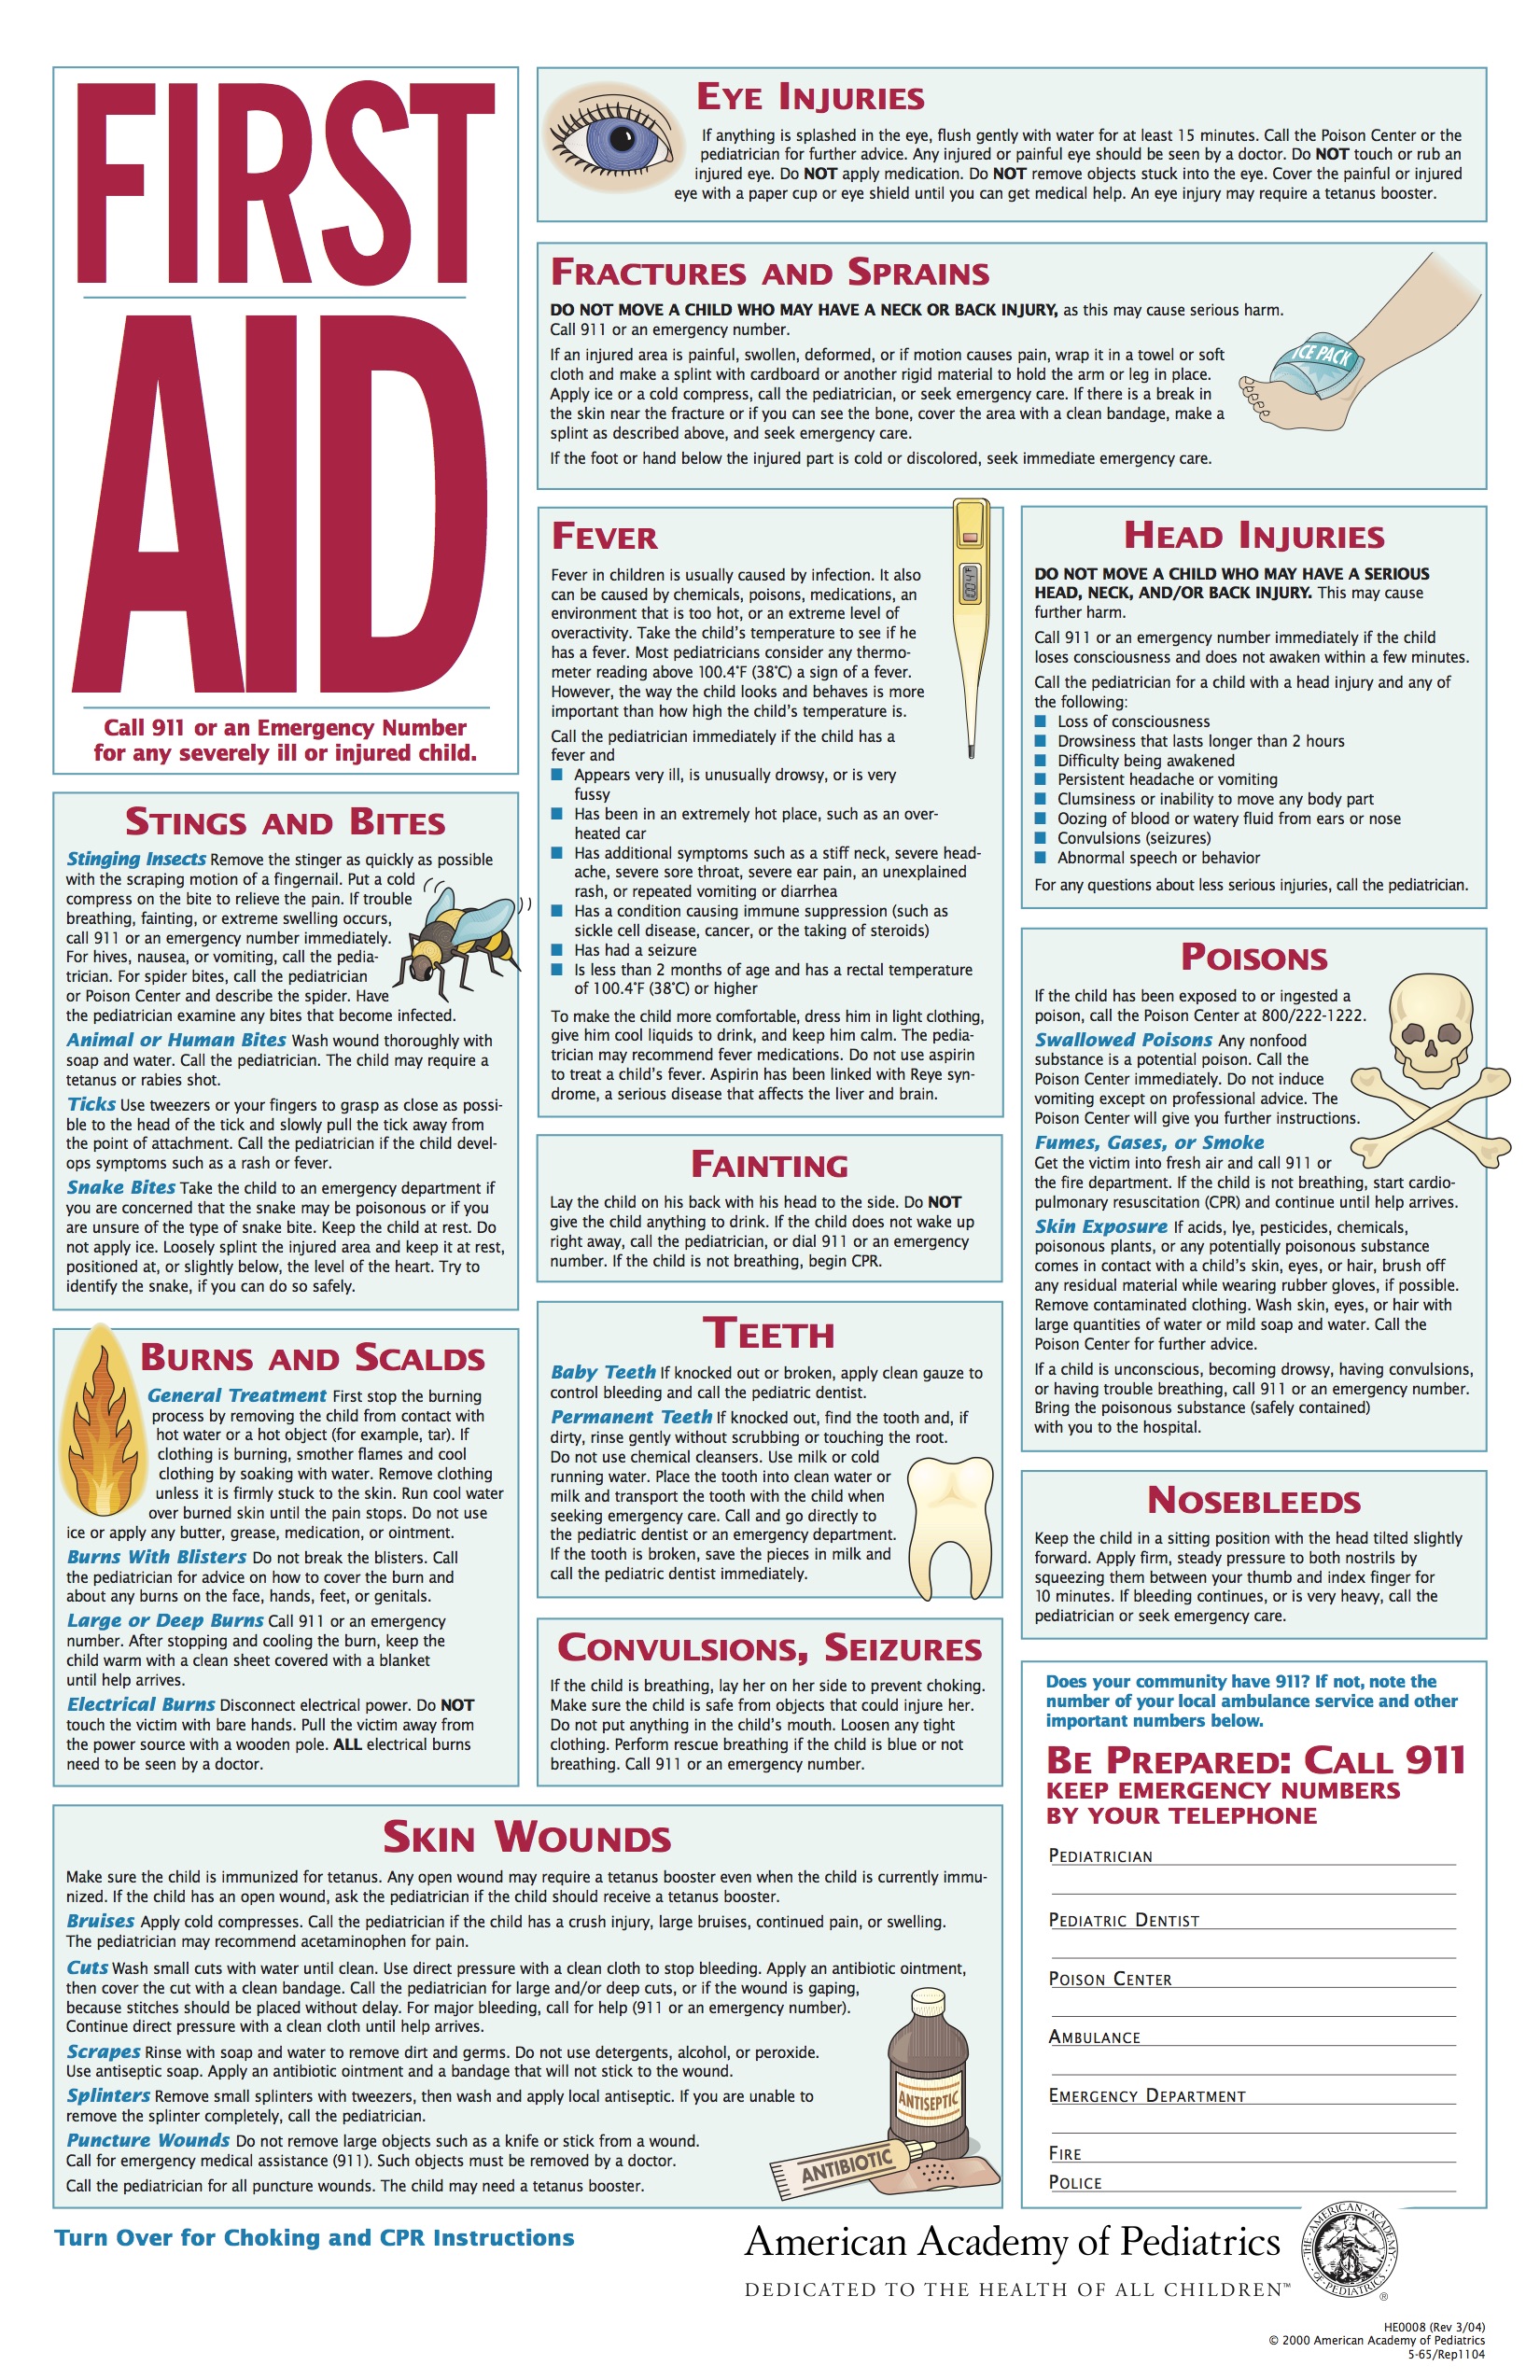 free-printable-first-aid-guide-first-aid-poster-first-aid-first-aid